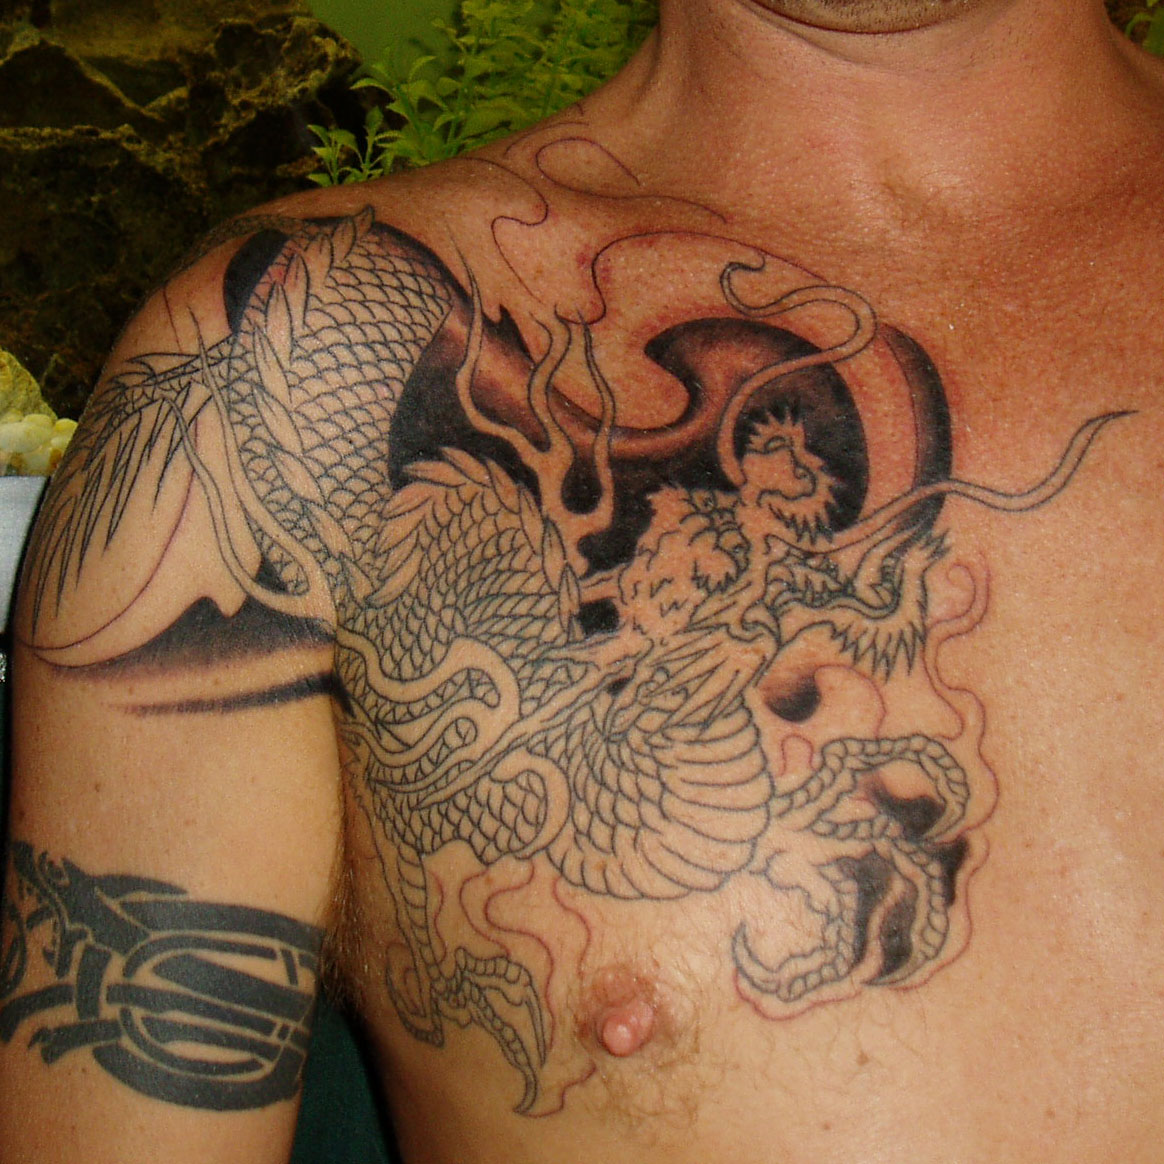 Tribal Tattoos For Men - Choose the Best Design Without Regrets